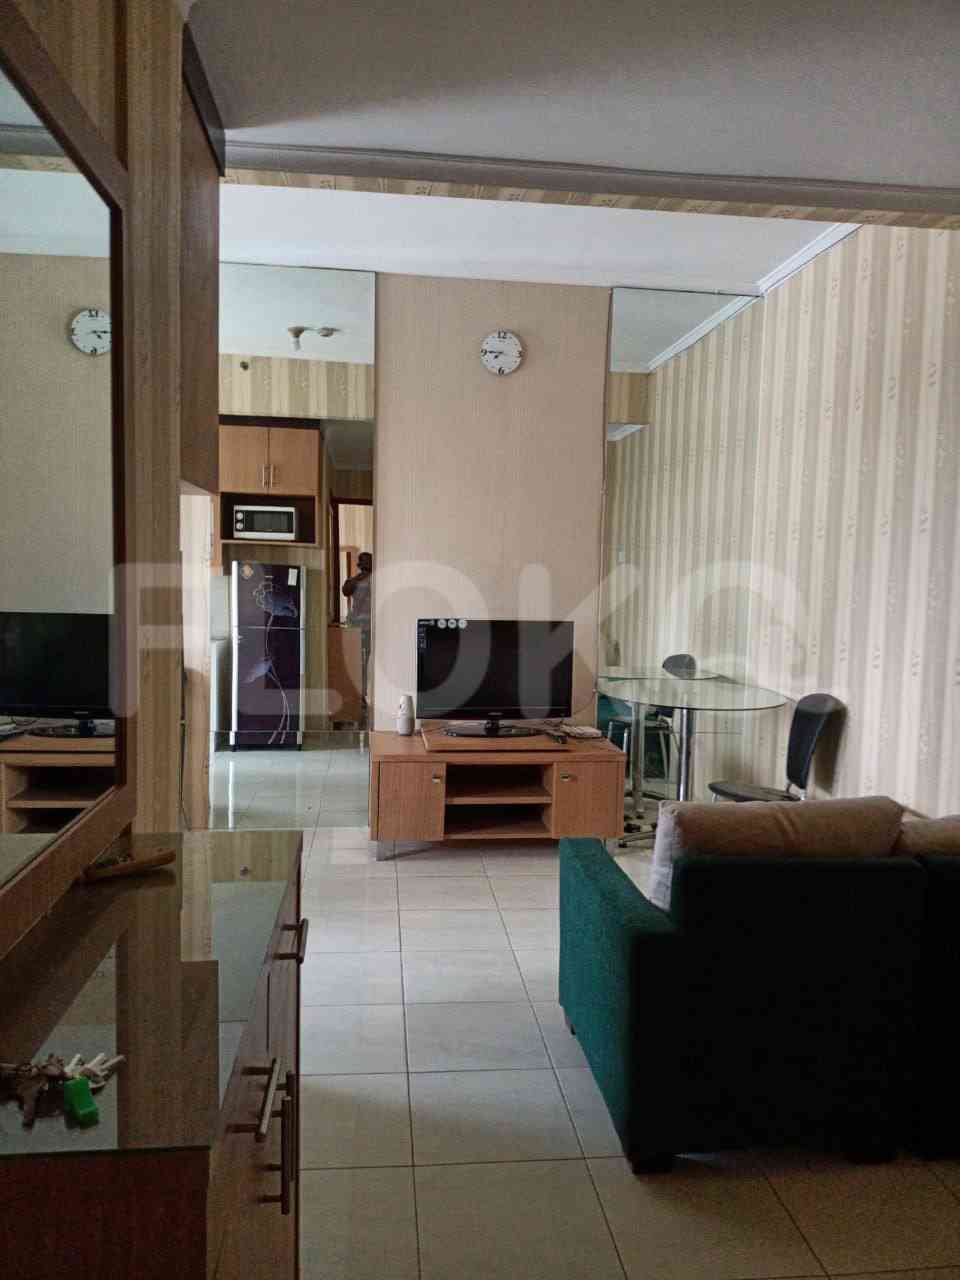 2 Bedroom on 7th Floor for Rent in Sudirman Park Apartment - ftad1f 5